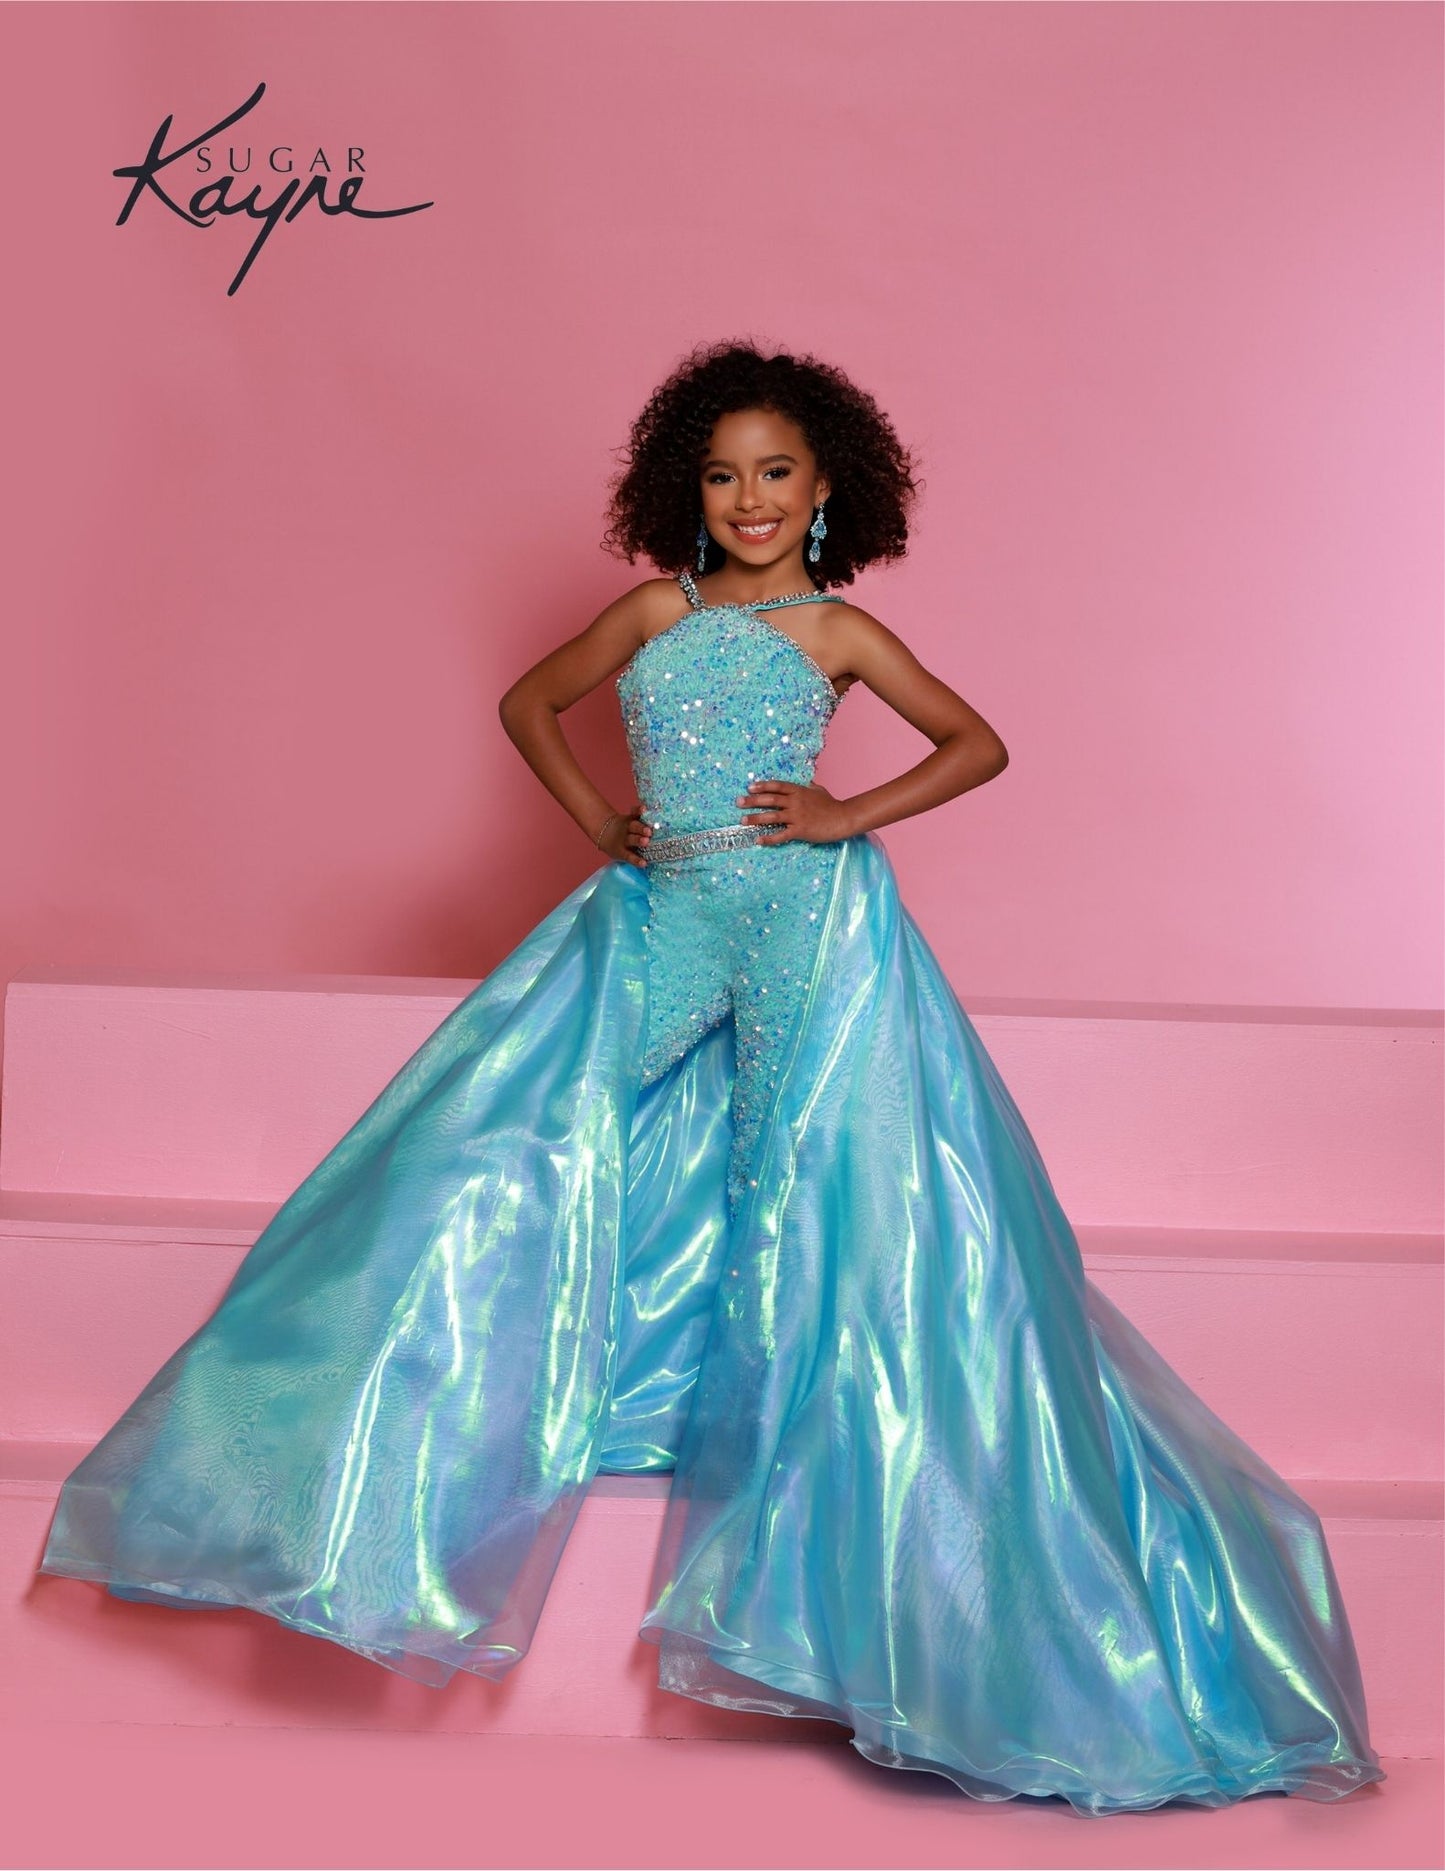 Sugar Kayne C332 offers a unique sequined jumpsuit style for girls and preteens with its fun fashion detachable overskirt and halter neckline on aqua stretch sequin velvet. 